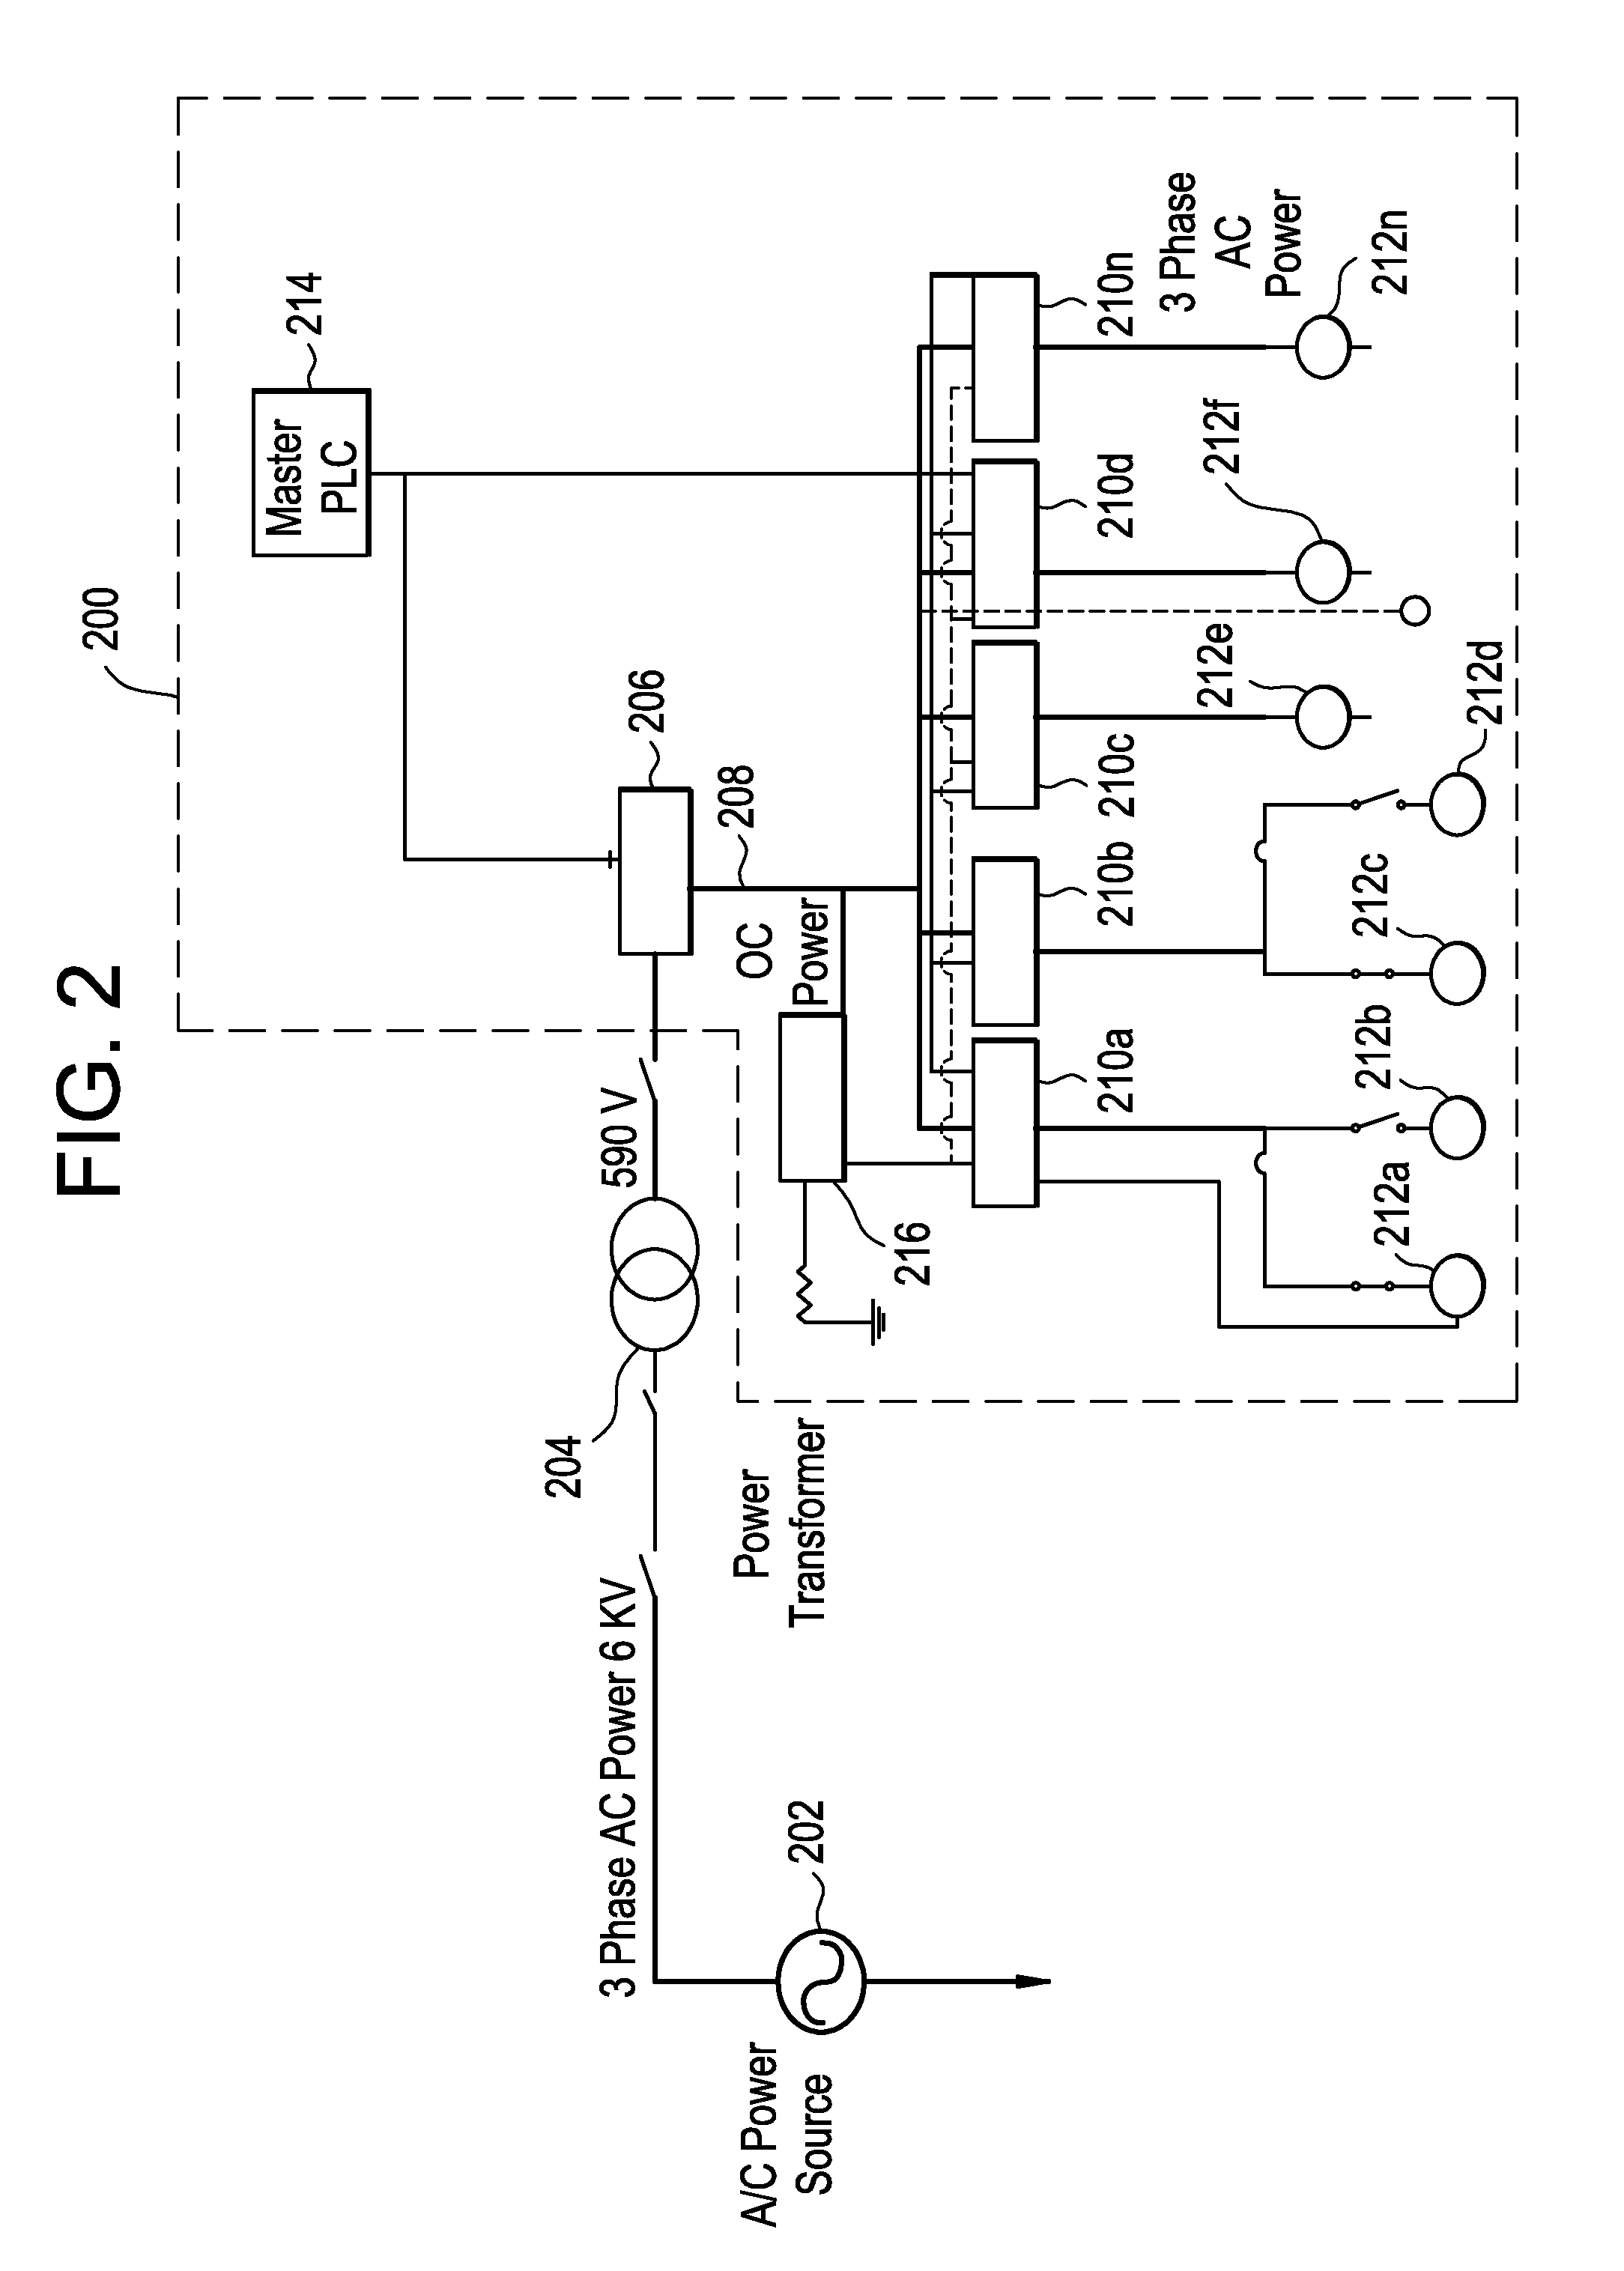 Power control on a multi-motion electric drive system